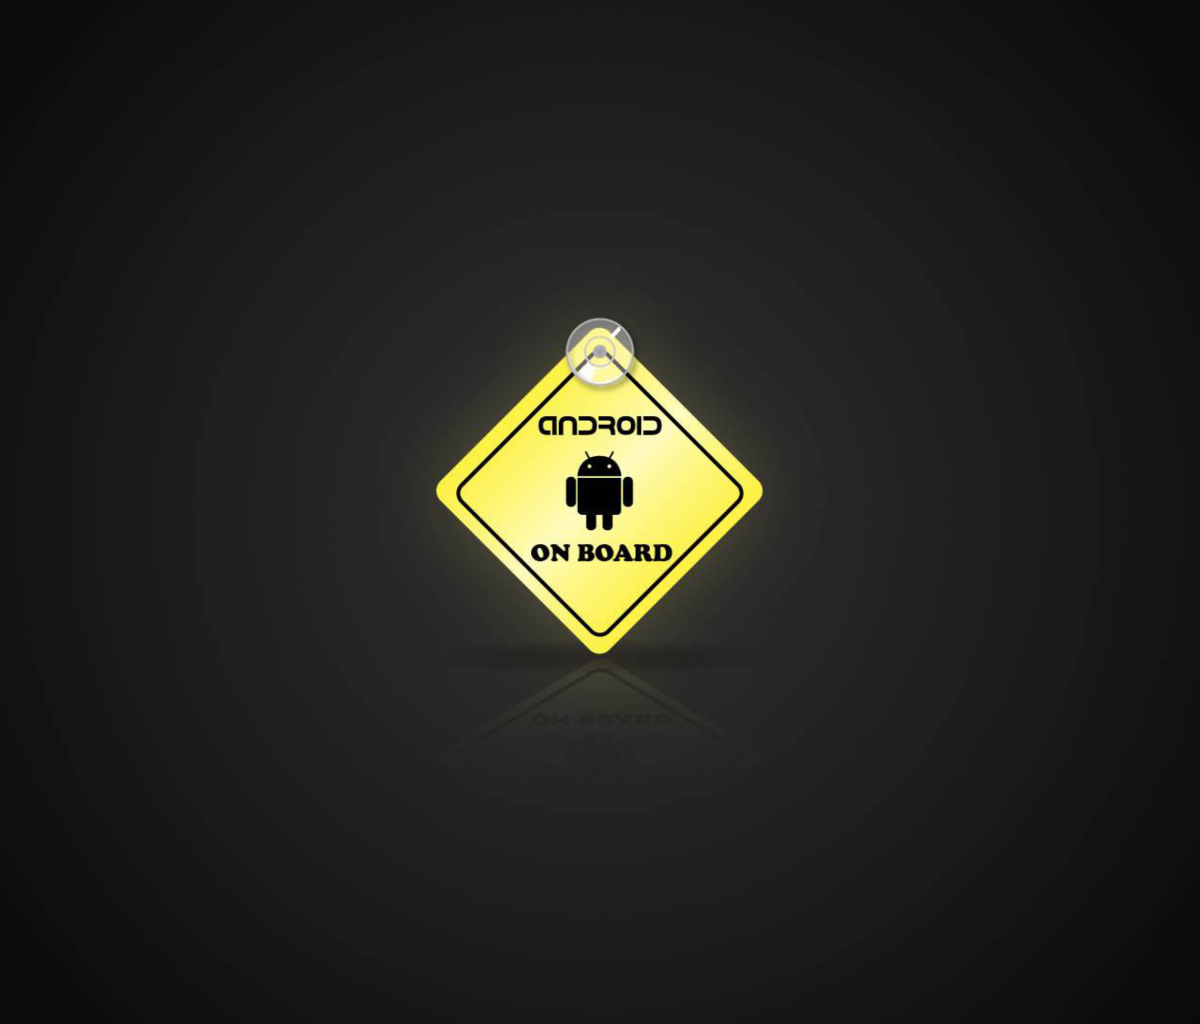 Android On Board wallpaper 1200x1024